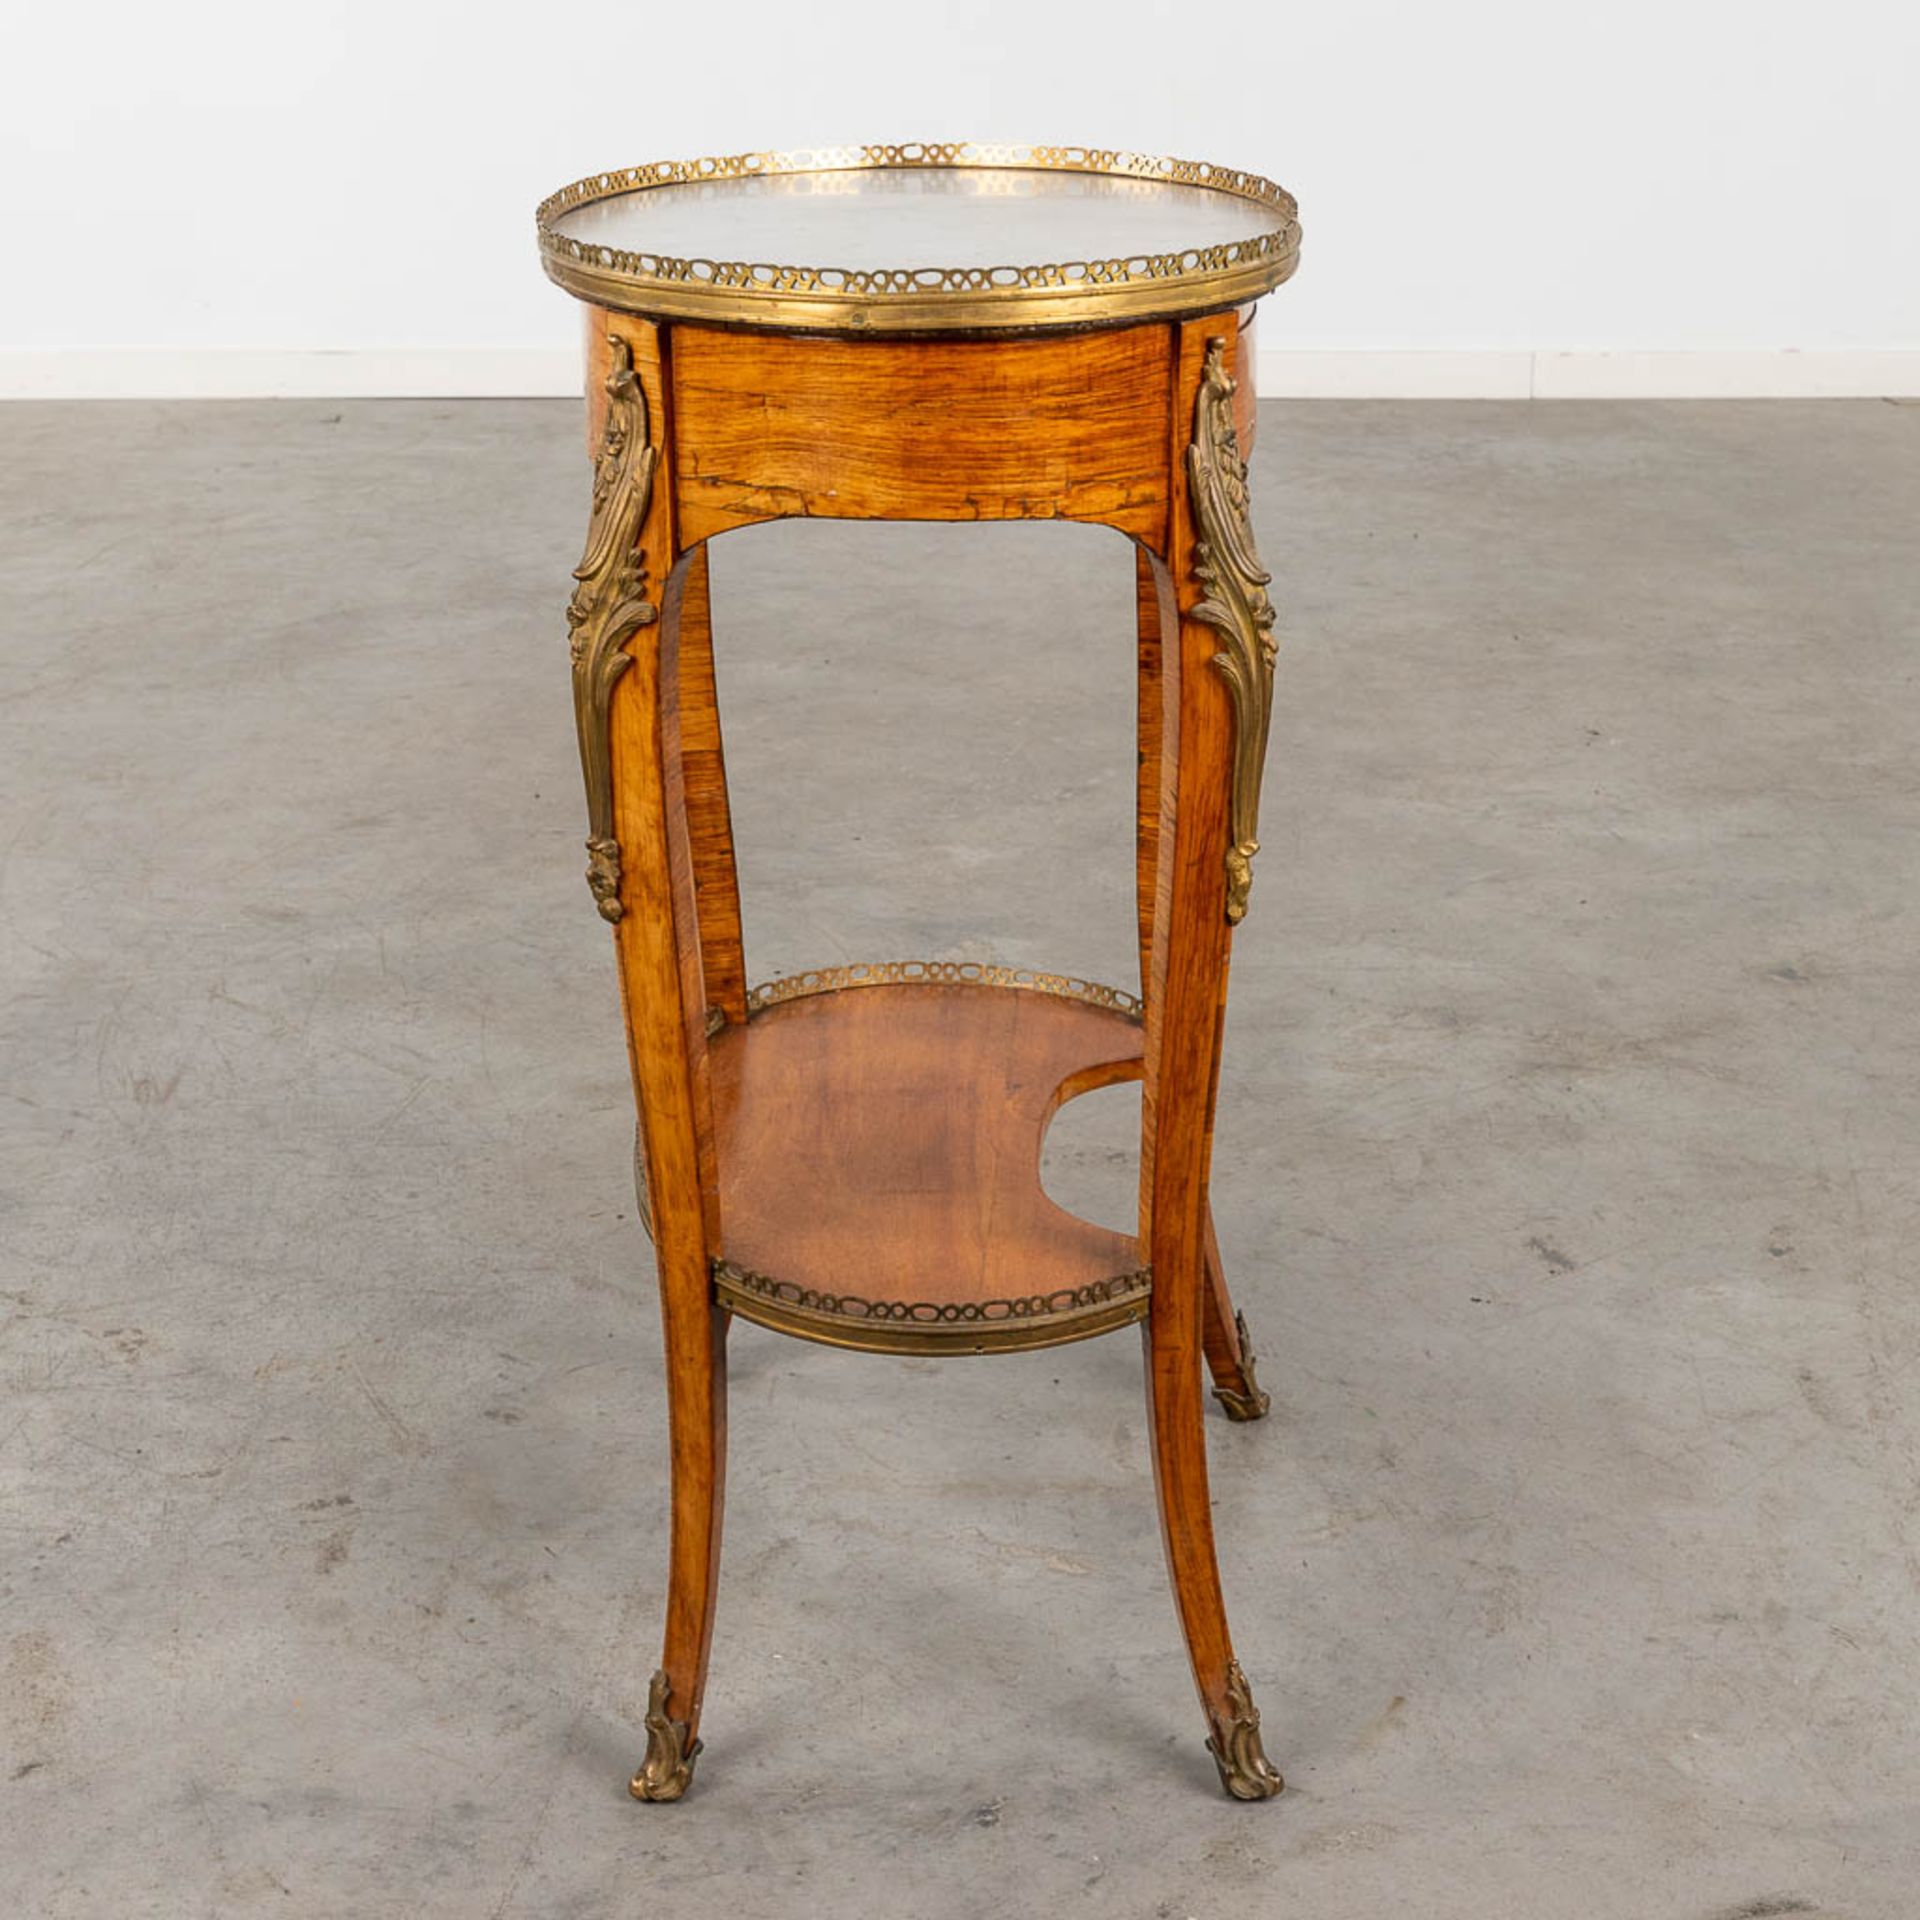 An antique side table, Louis XV, marquetry mounted with bronze and marble, 18th C. (D:38 x W:50 x H: - Image 5 of 14